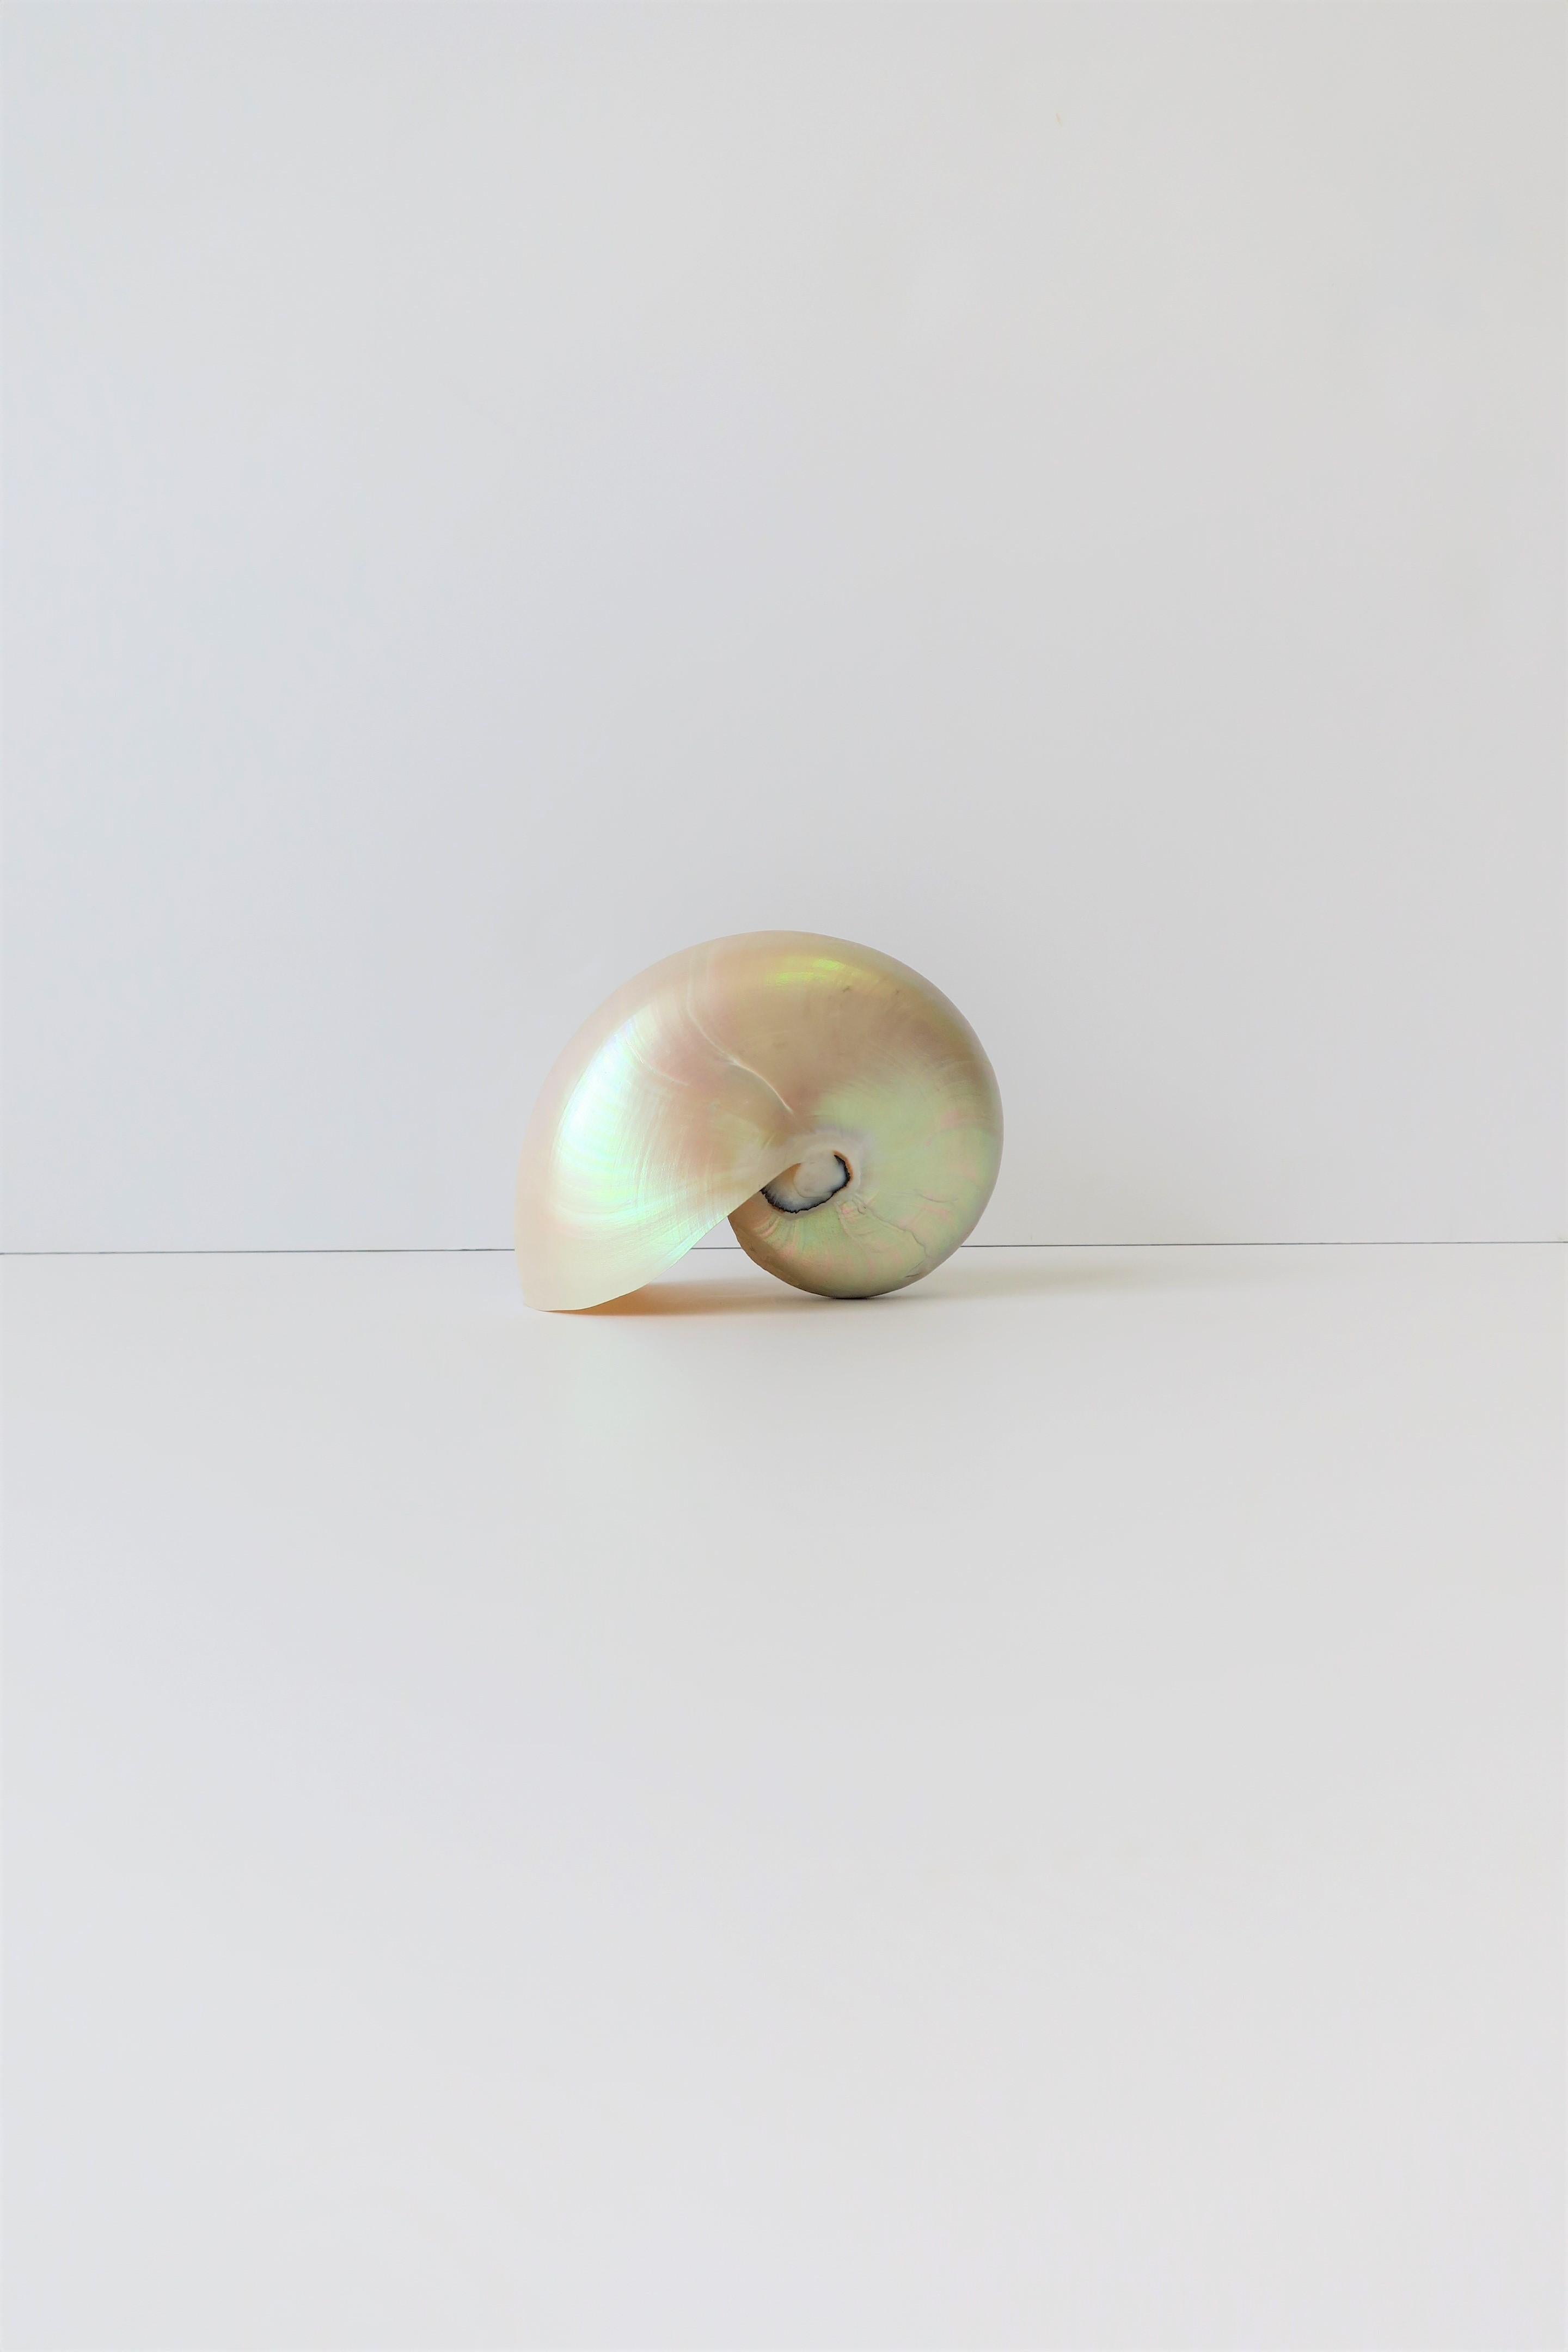 White Mother-of-Pearl Nautilus Sea Shell 6